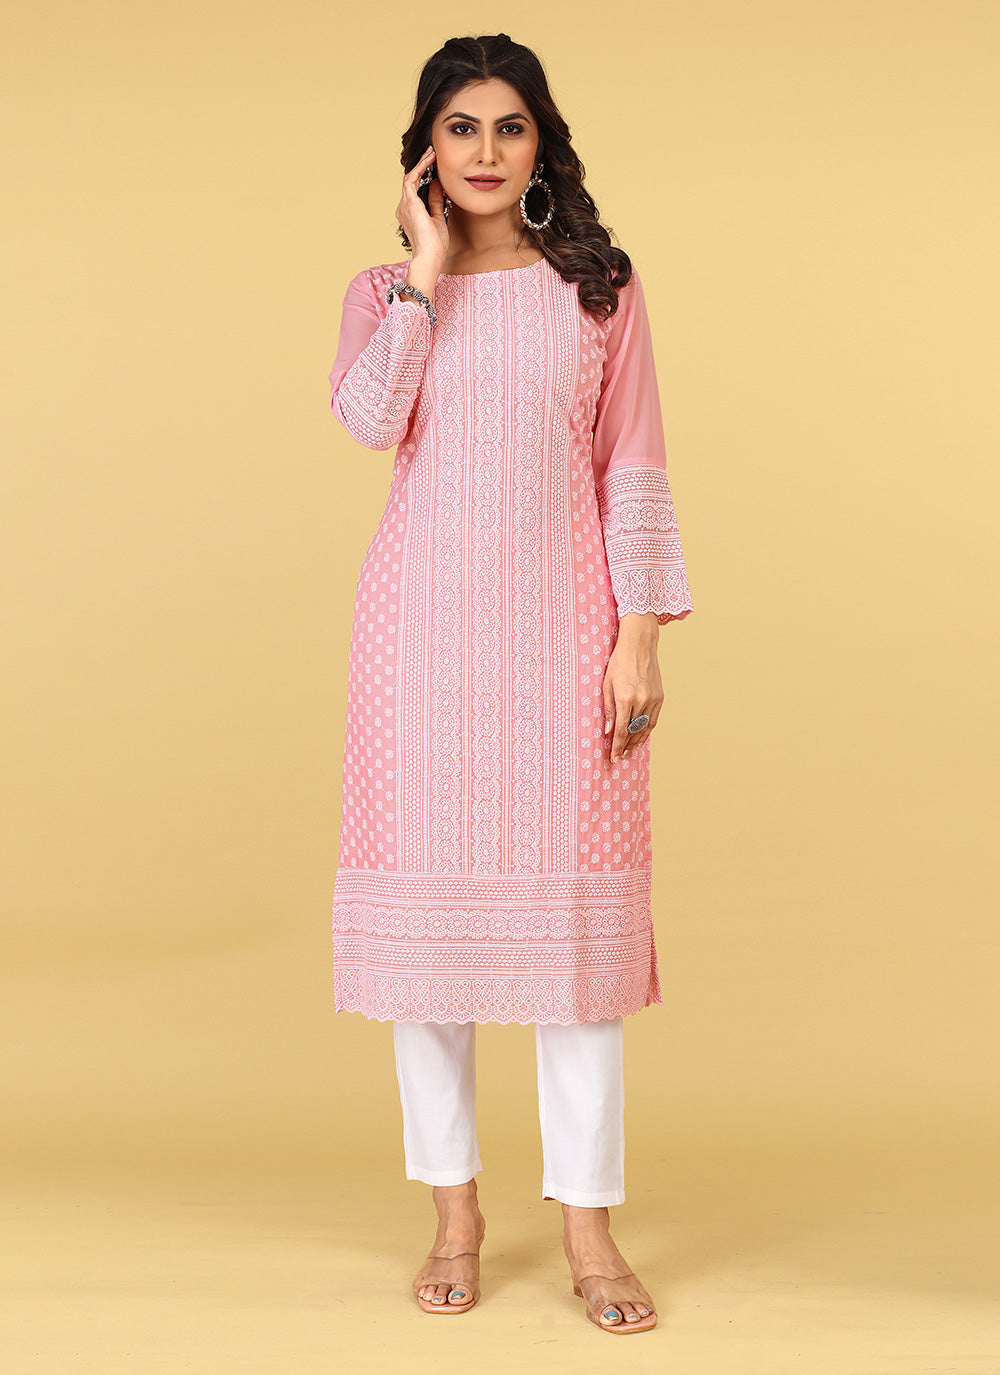 Voguish and Trendy Party Wear Kurtis that Will Make You A Dashing  Fashionista